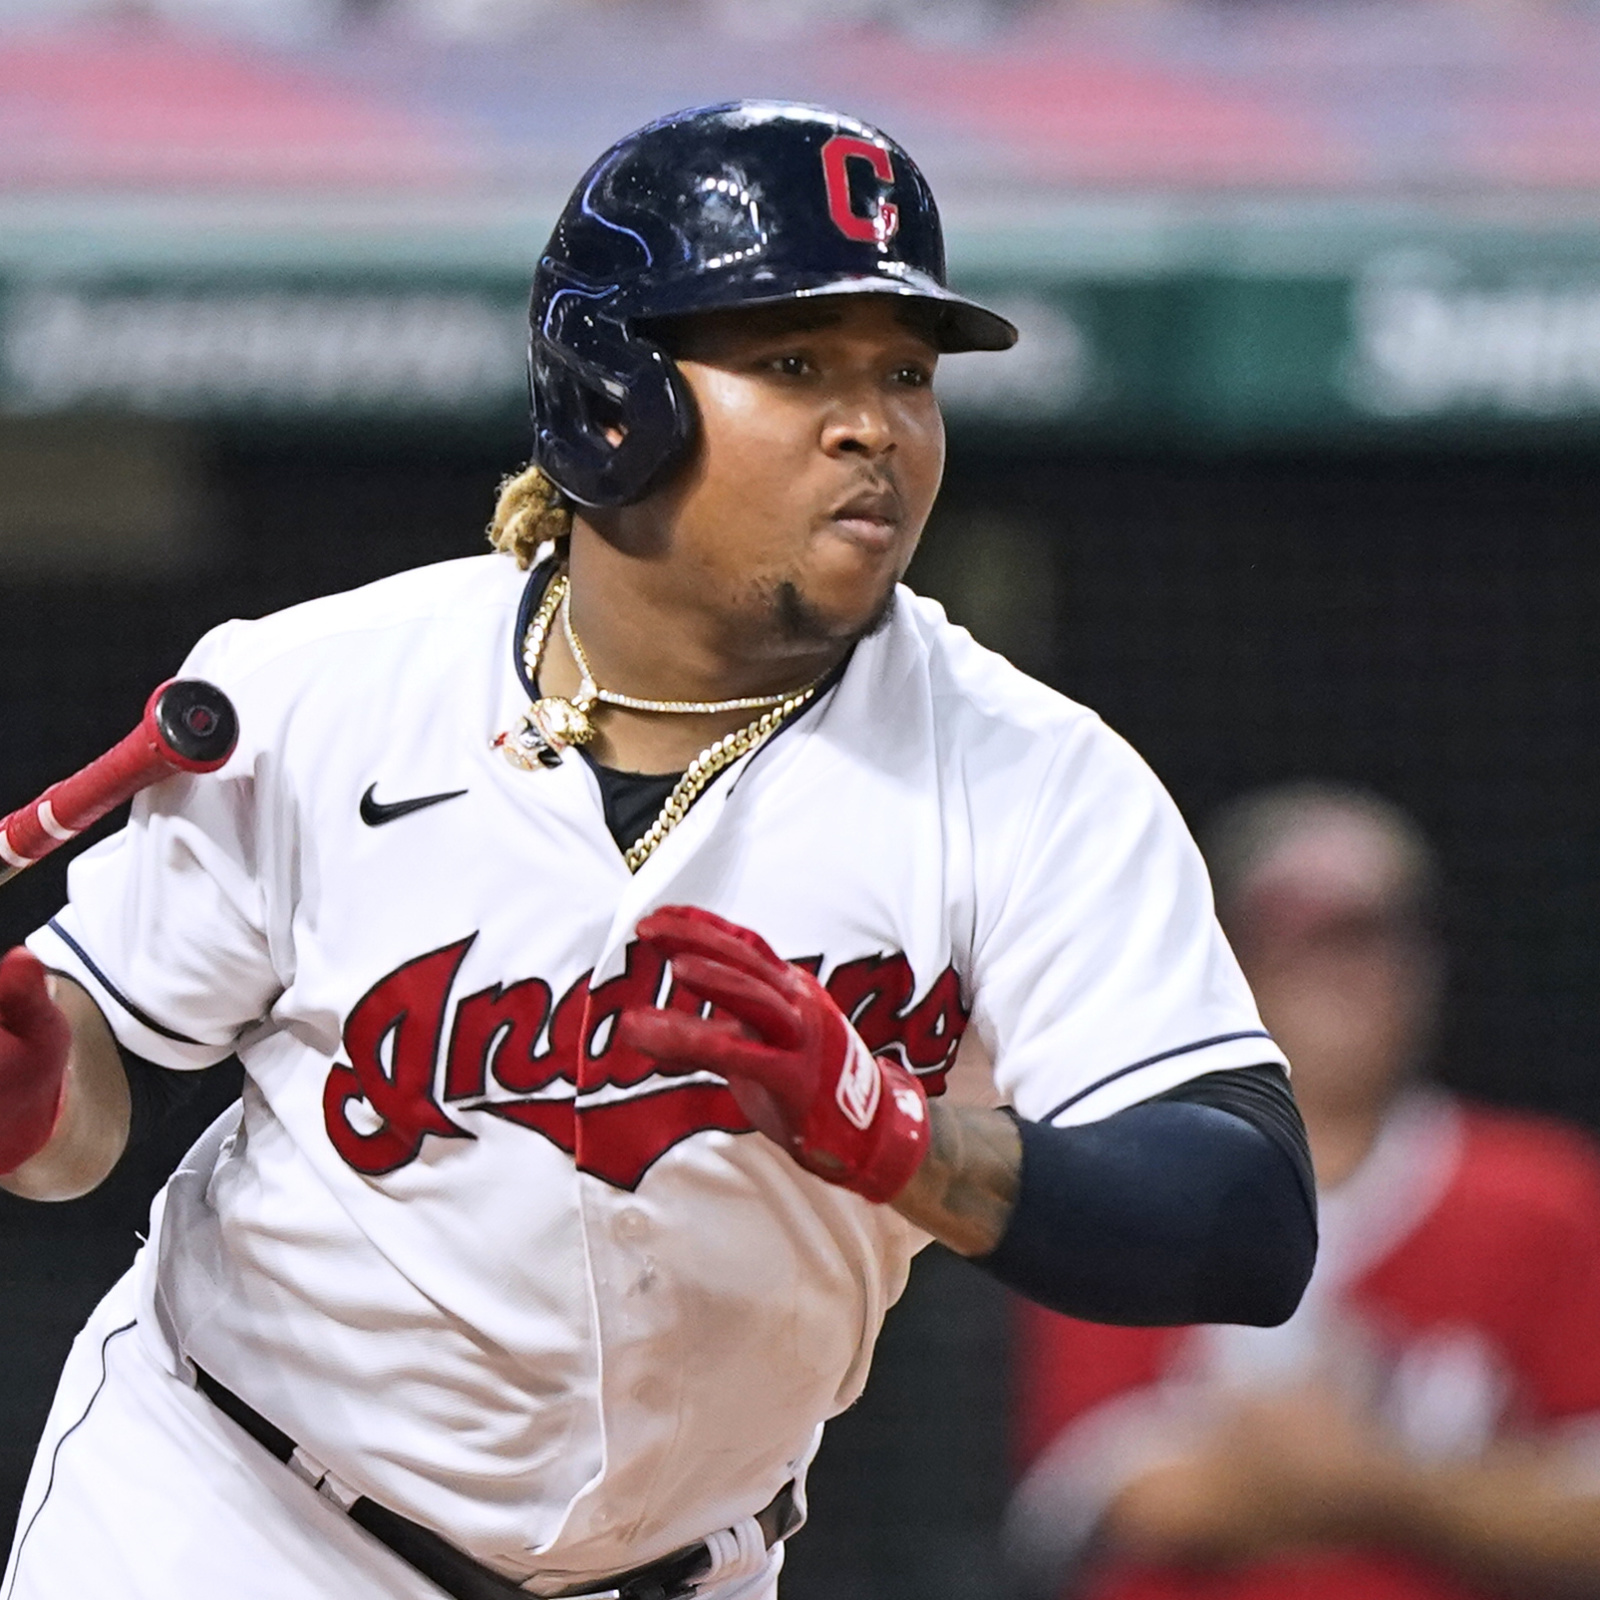 Report: Jose Ramirez could be available in trade